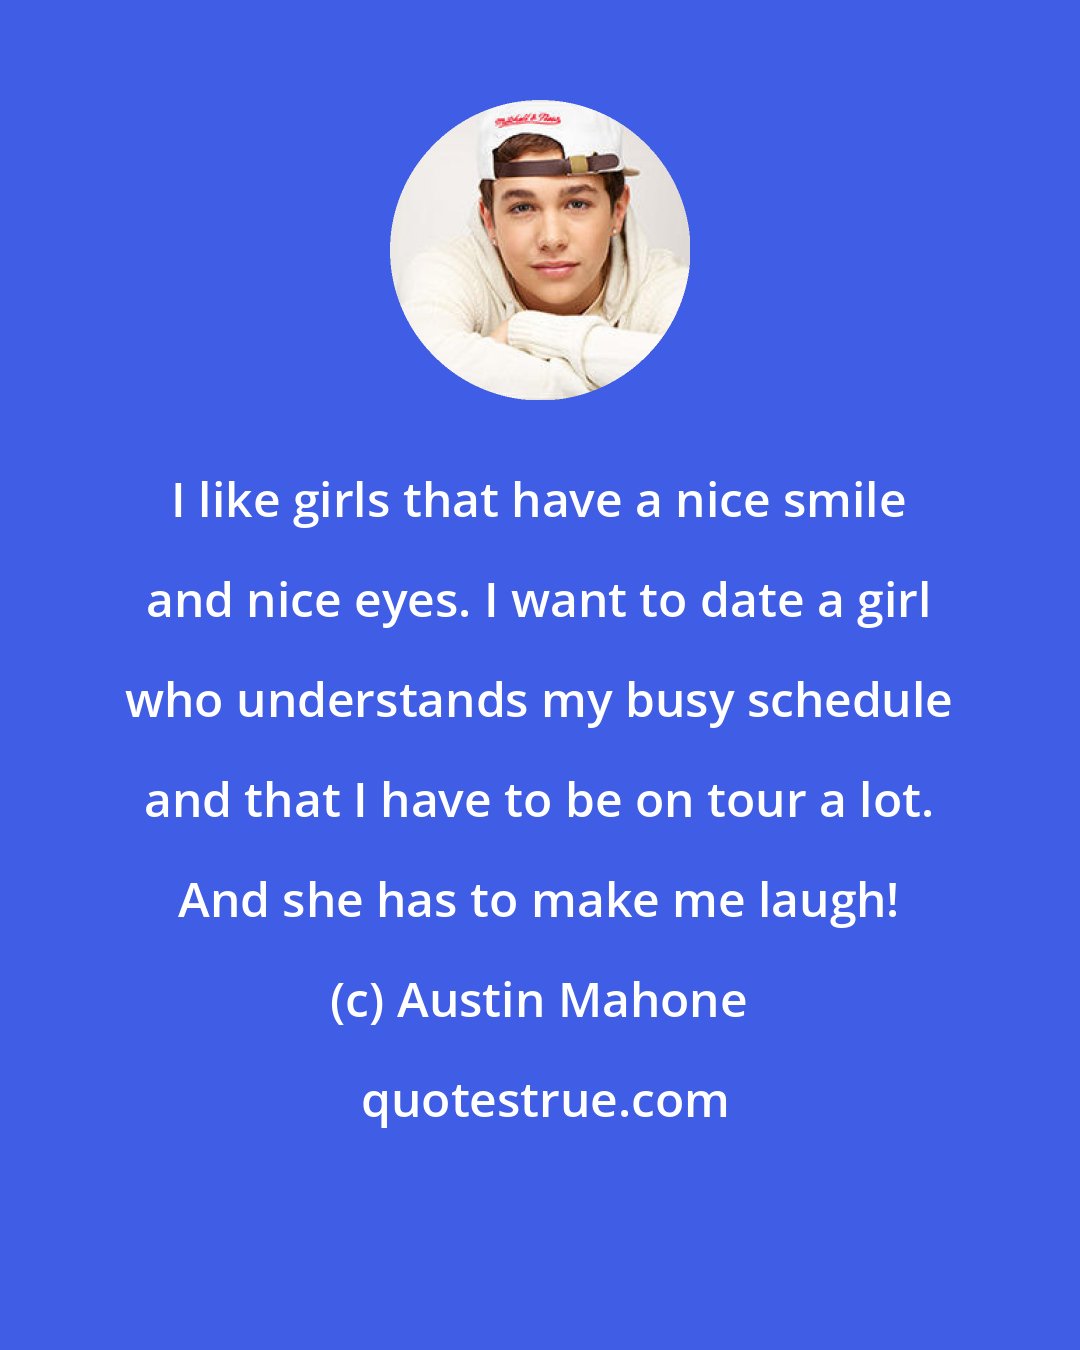 Austin Mahone: I like girls that have a nice smile and nice eyes. I want to date a girl who understands my busy schedule and that I have to be on tour a lot. And she has to make me laugh!